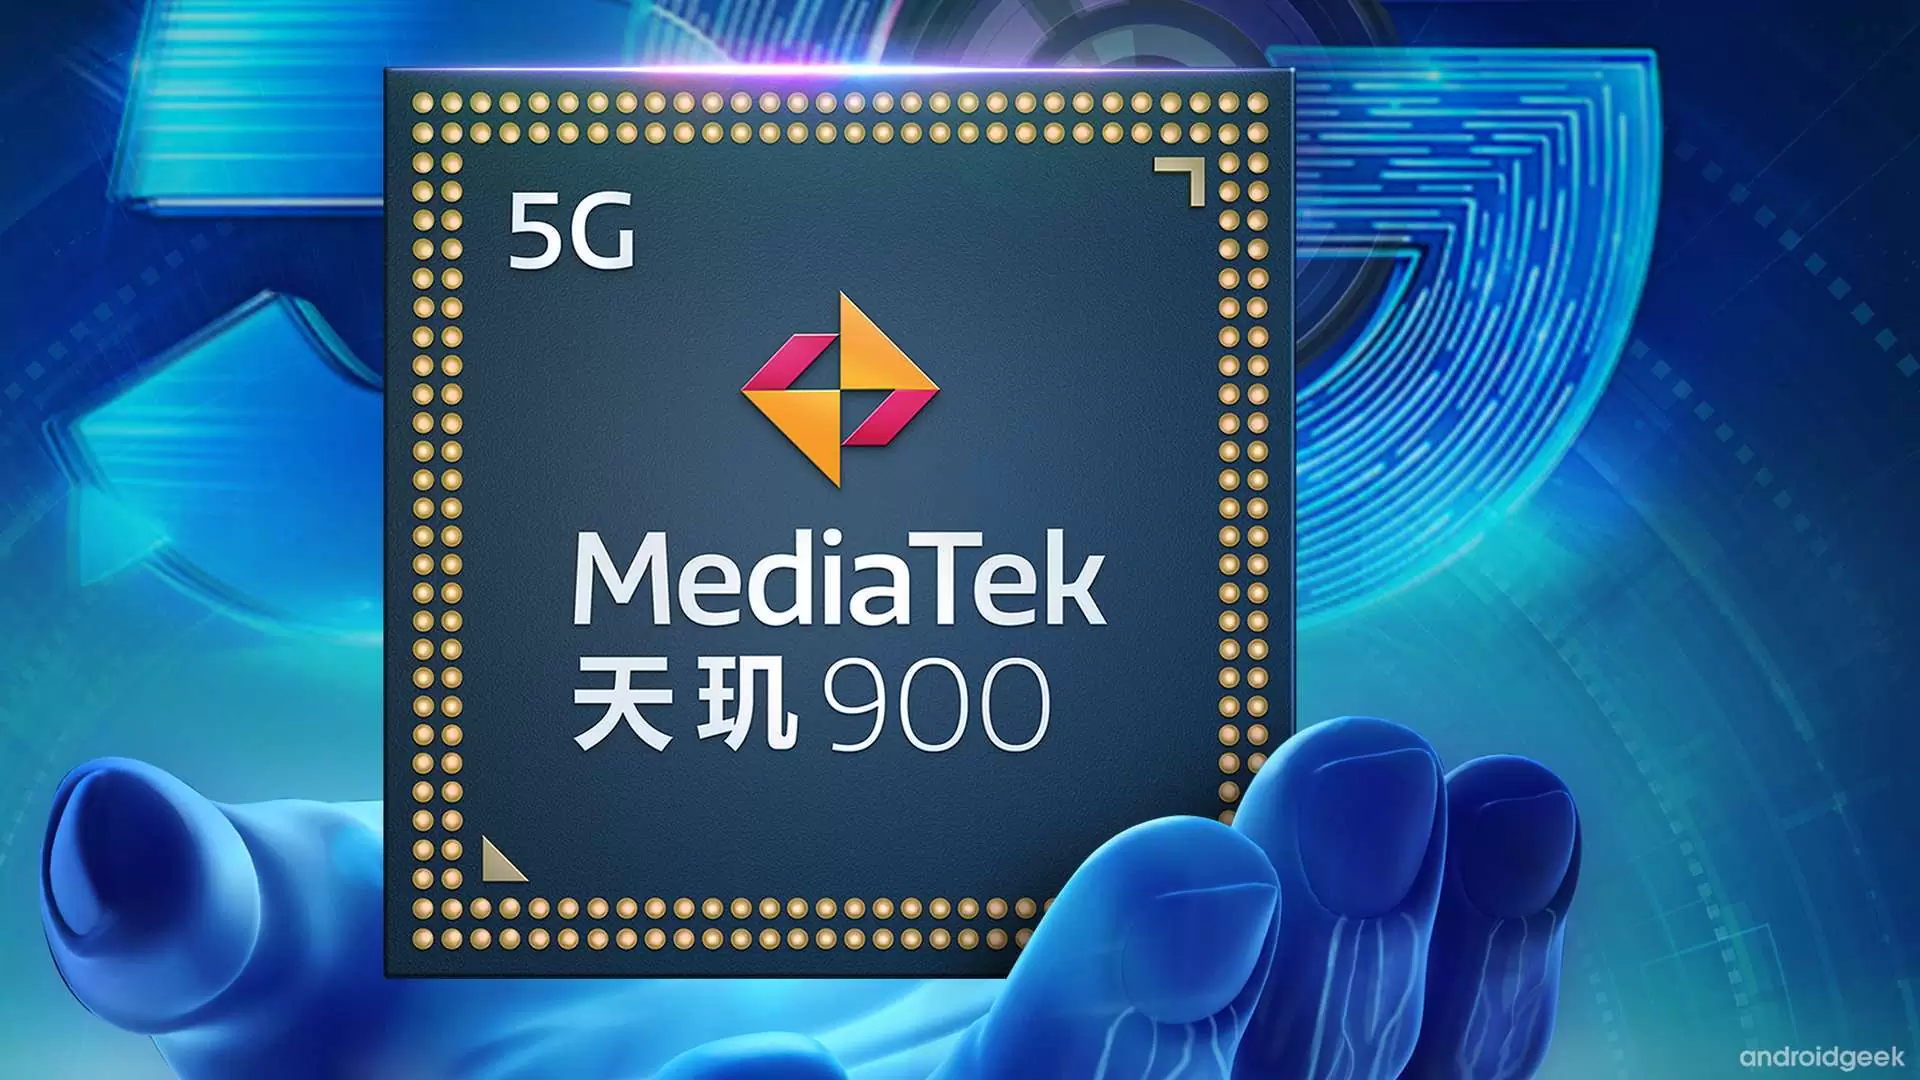 In the end, the Honor X20 will be powered by a different MediaTek chipset.